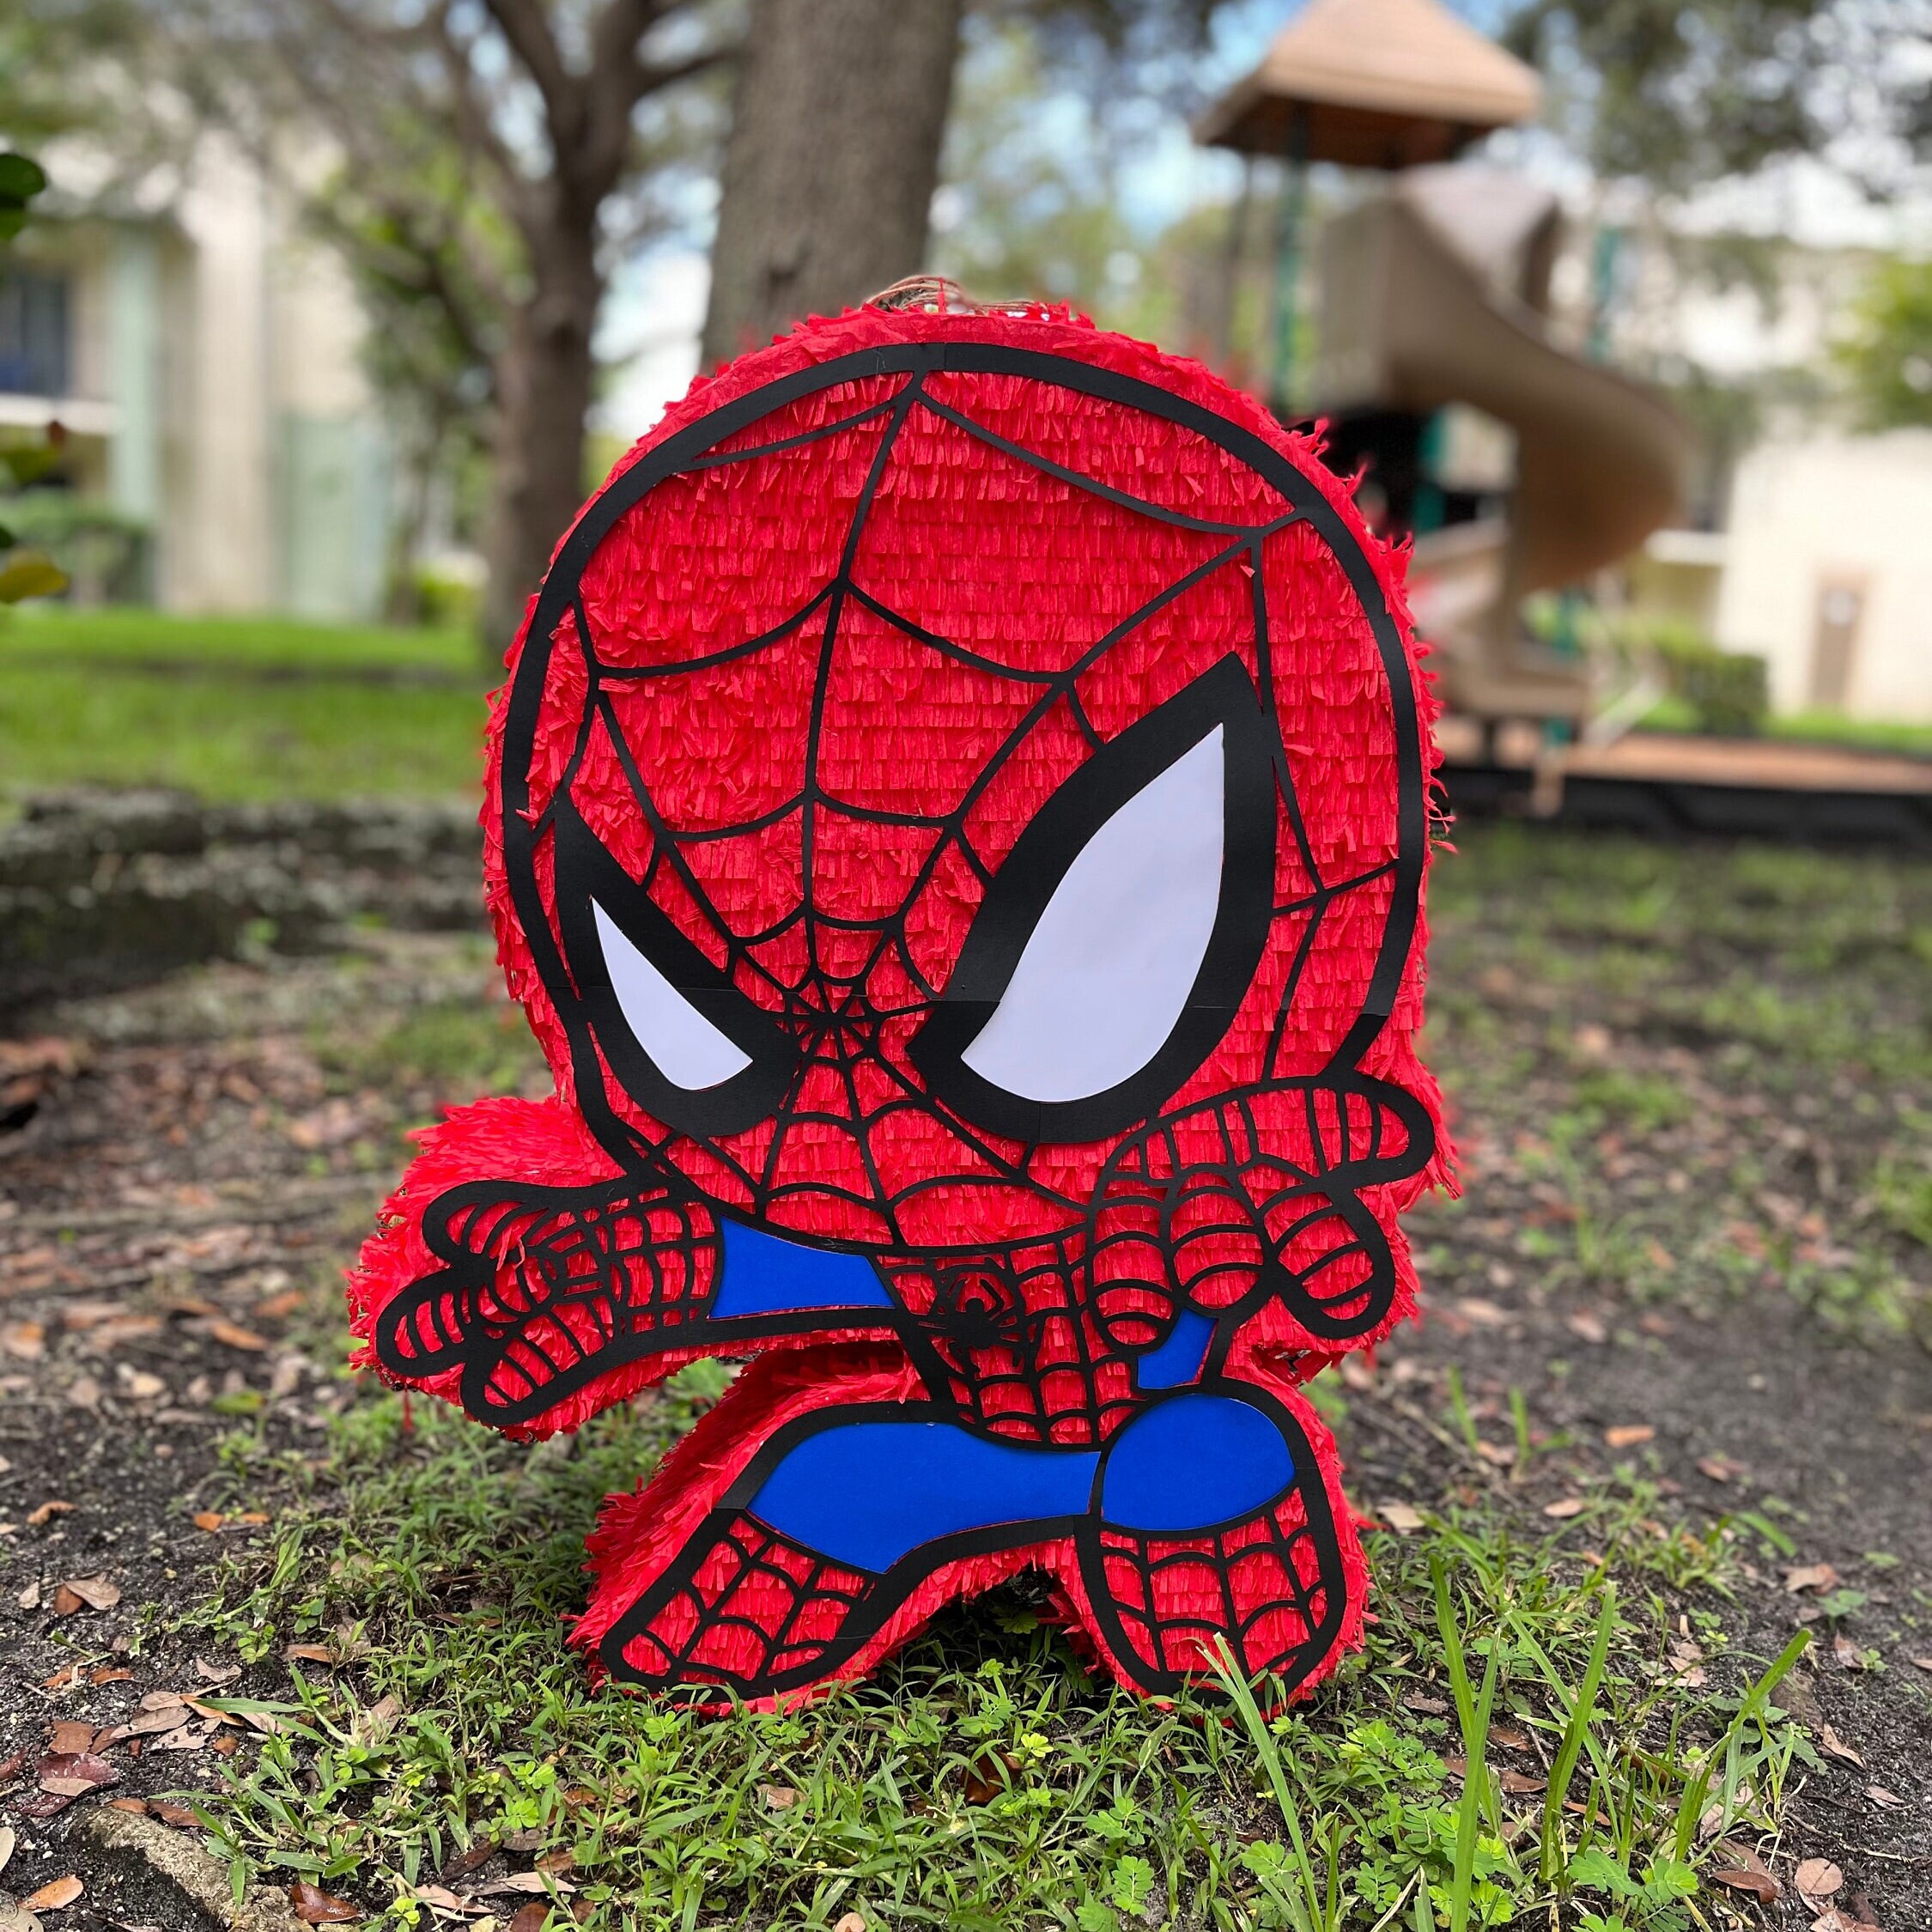 mundo pepe PINATA SPIDERMAN - Piñata Hand Crafted 26x26x12[Holds 2-3 Lb.  Of Candy][for Any Ocasion] - Home - Crafts & Hobbies - Party Supplies -  Party Decorations & Favors